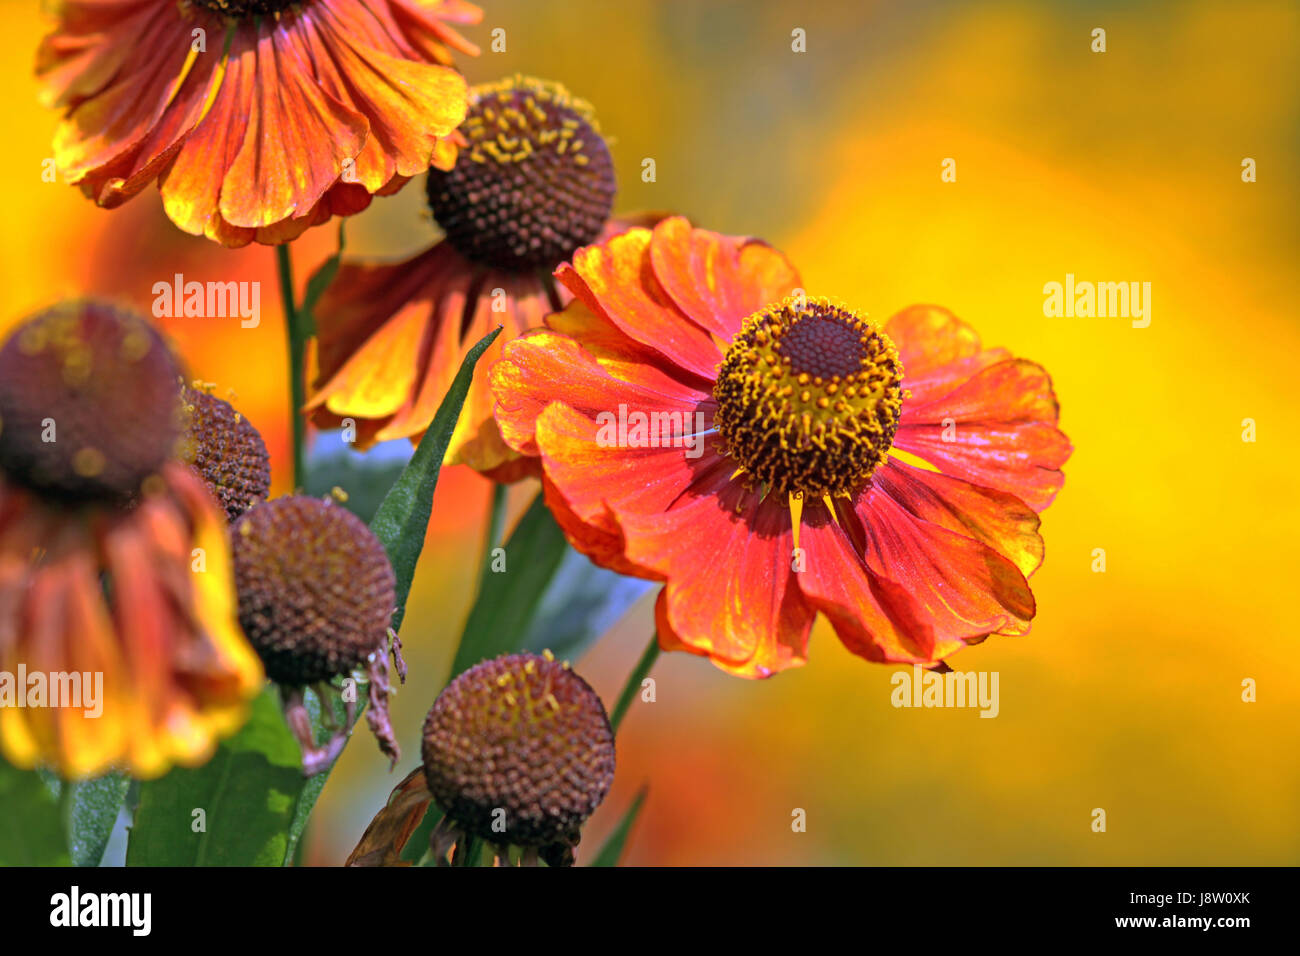 fire, conflagration, fiery, red, yellow, flower, plant, bloom, blossom, Stock Photo